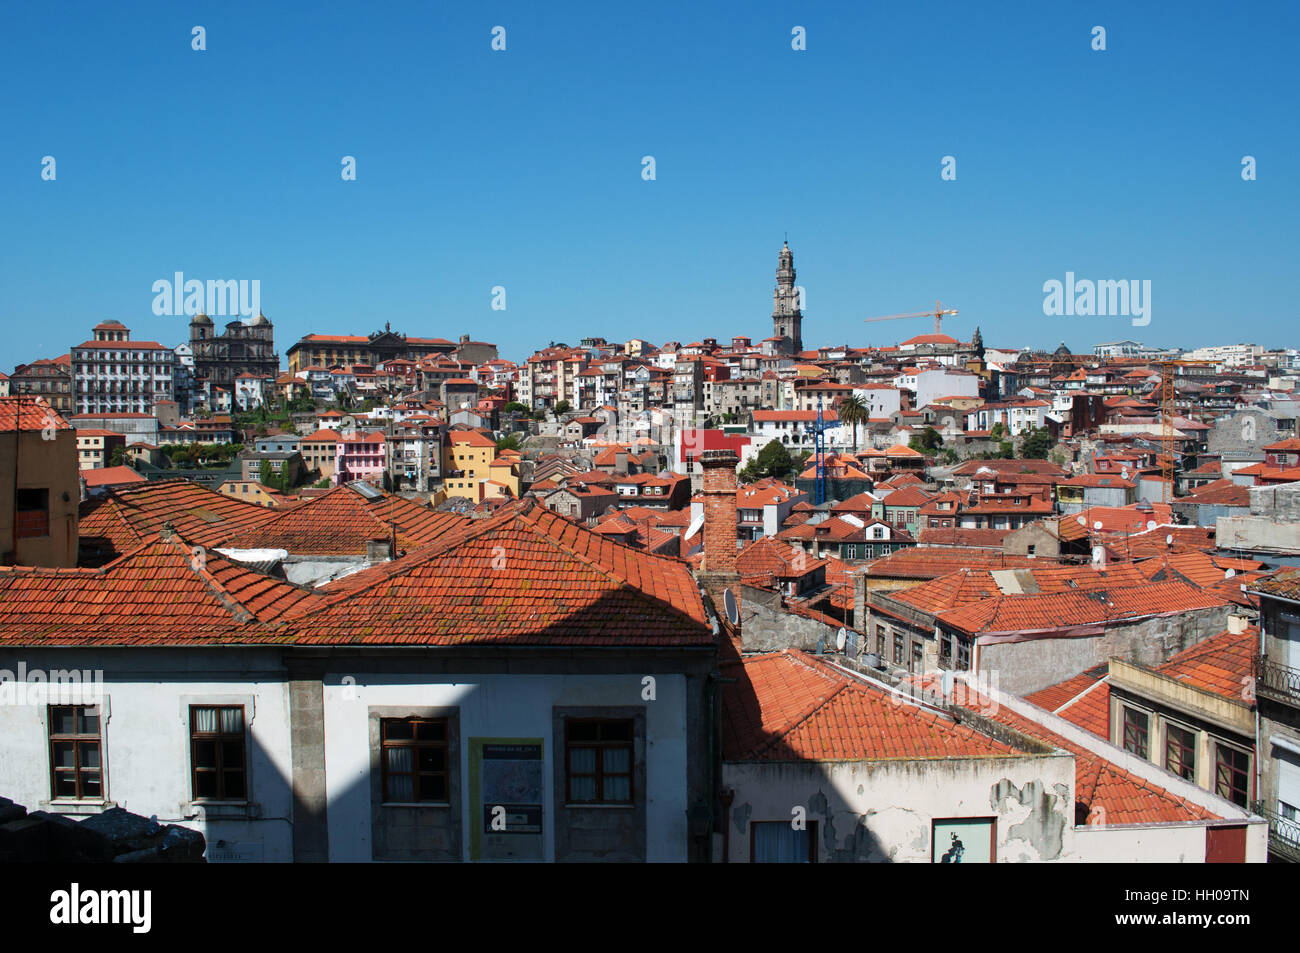 Porto, Portugal: red roofs of the Old City with view of Torre dos Clerigos, a stone tower in baroque style built between 1754 and 1763 Stock Photo